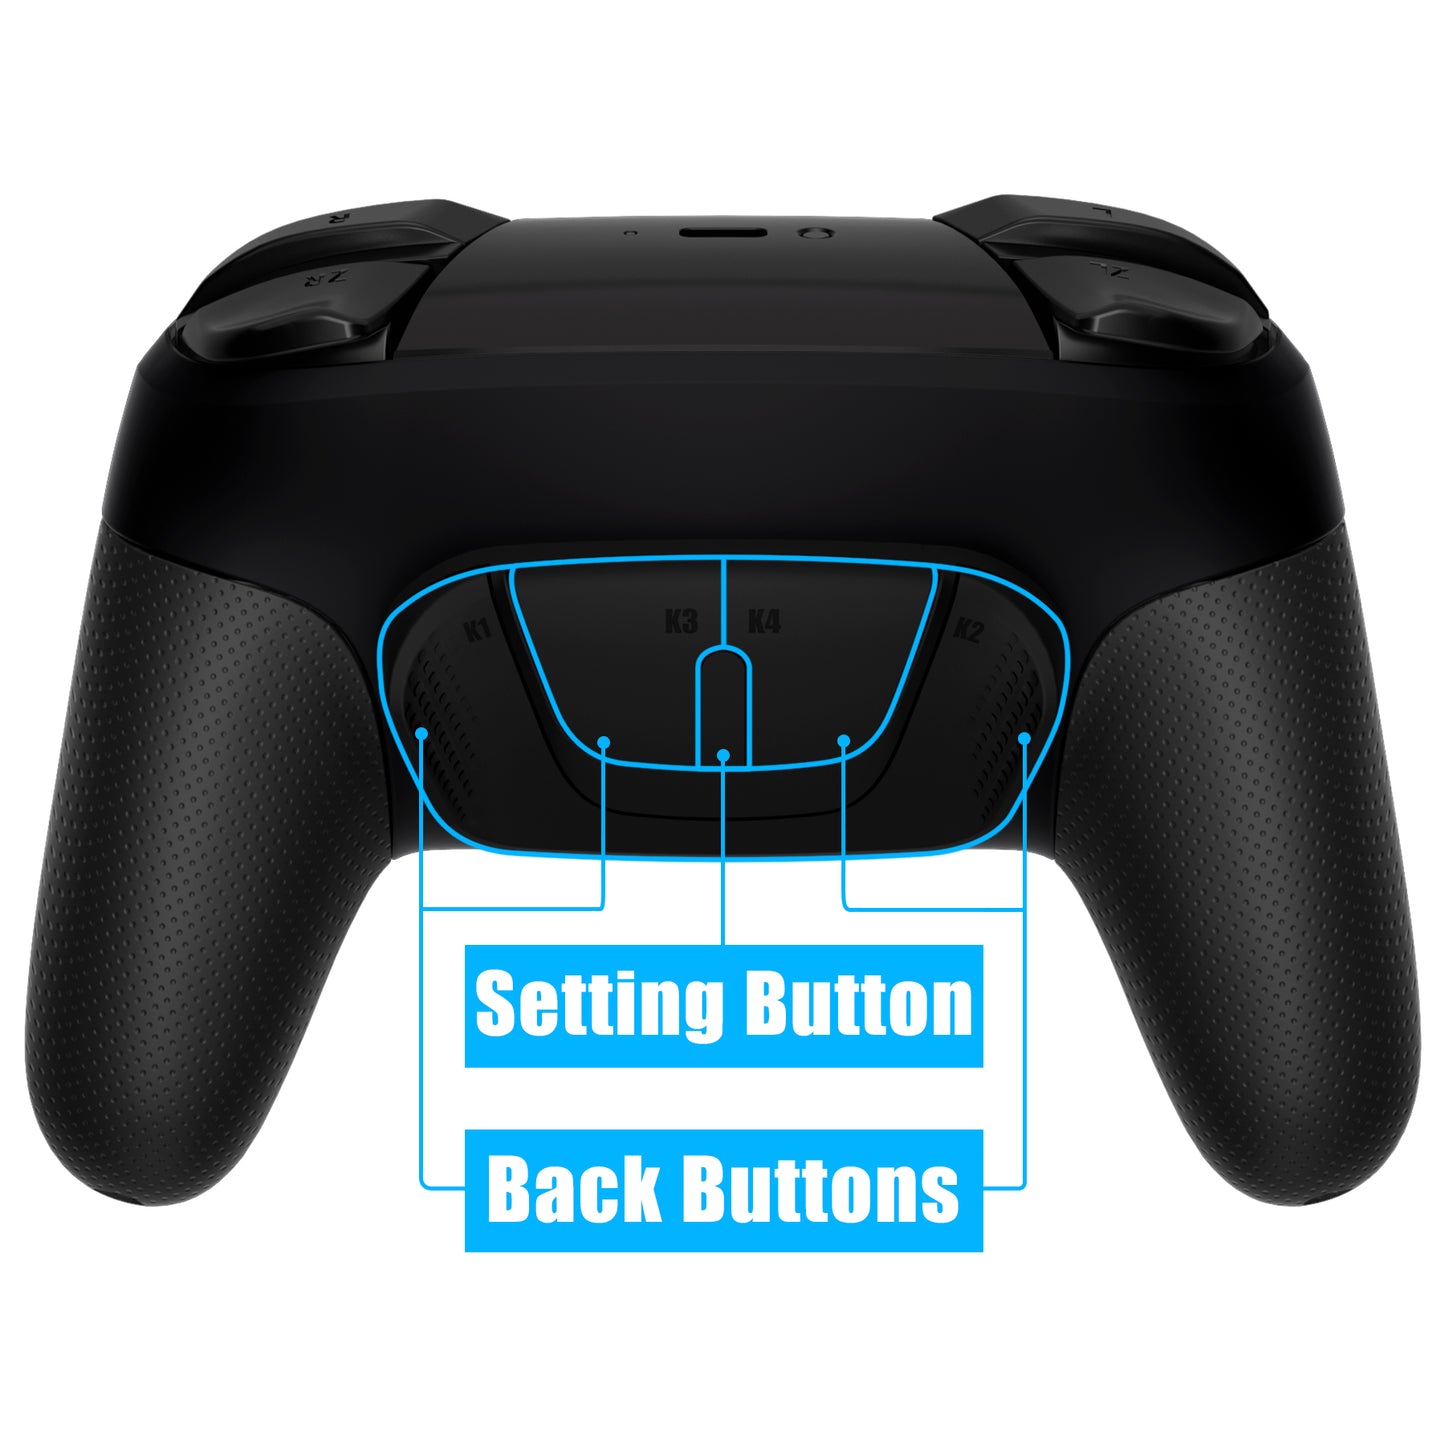 eXtremeRate Remappable RISE4 Remap Kit for Nintendo Switch Pro Controller - Black eXtremeRate